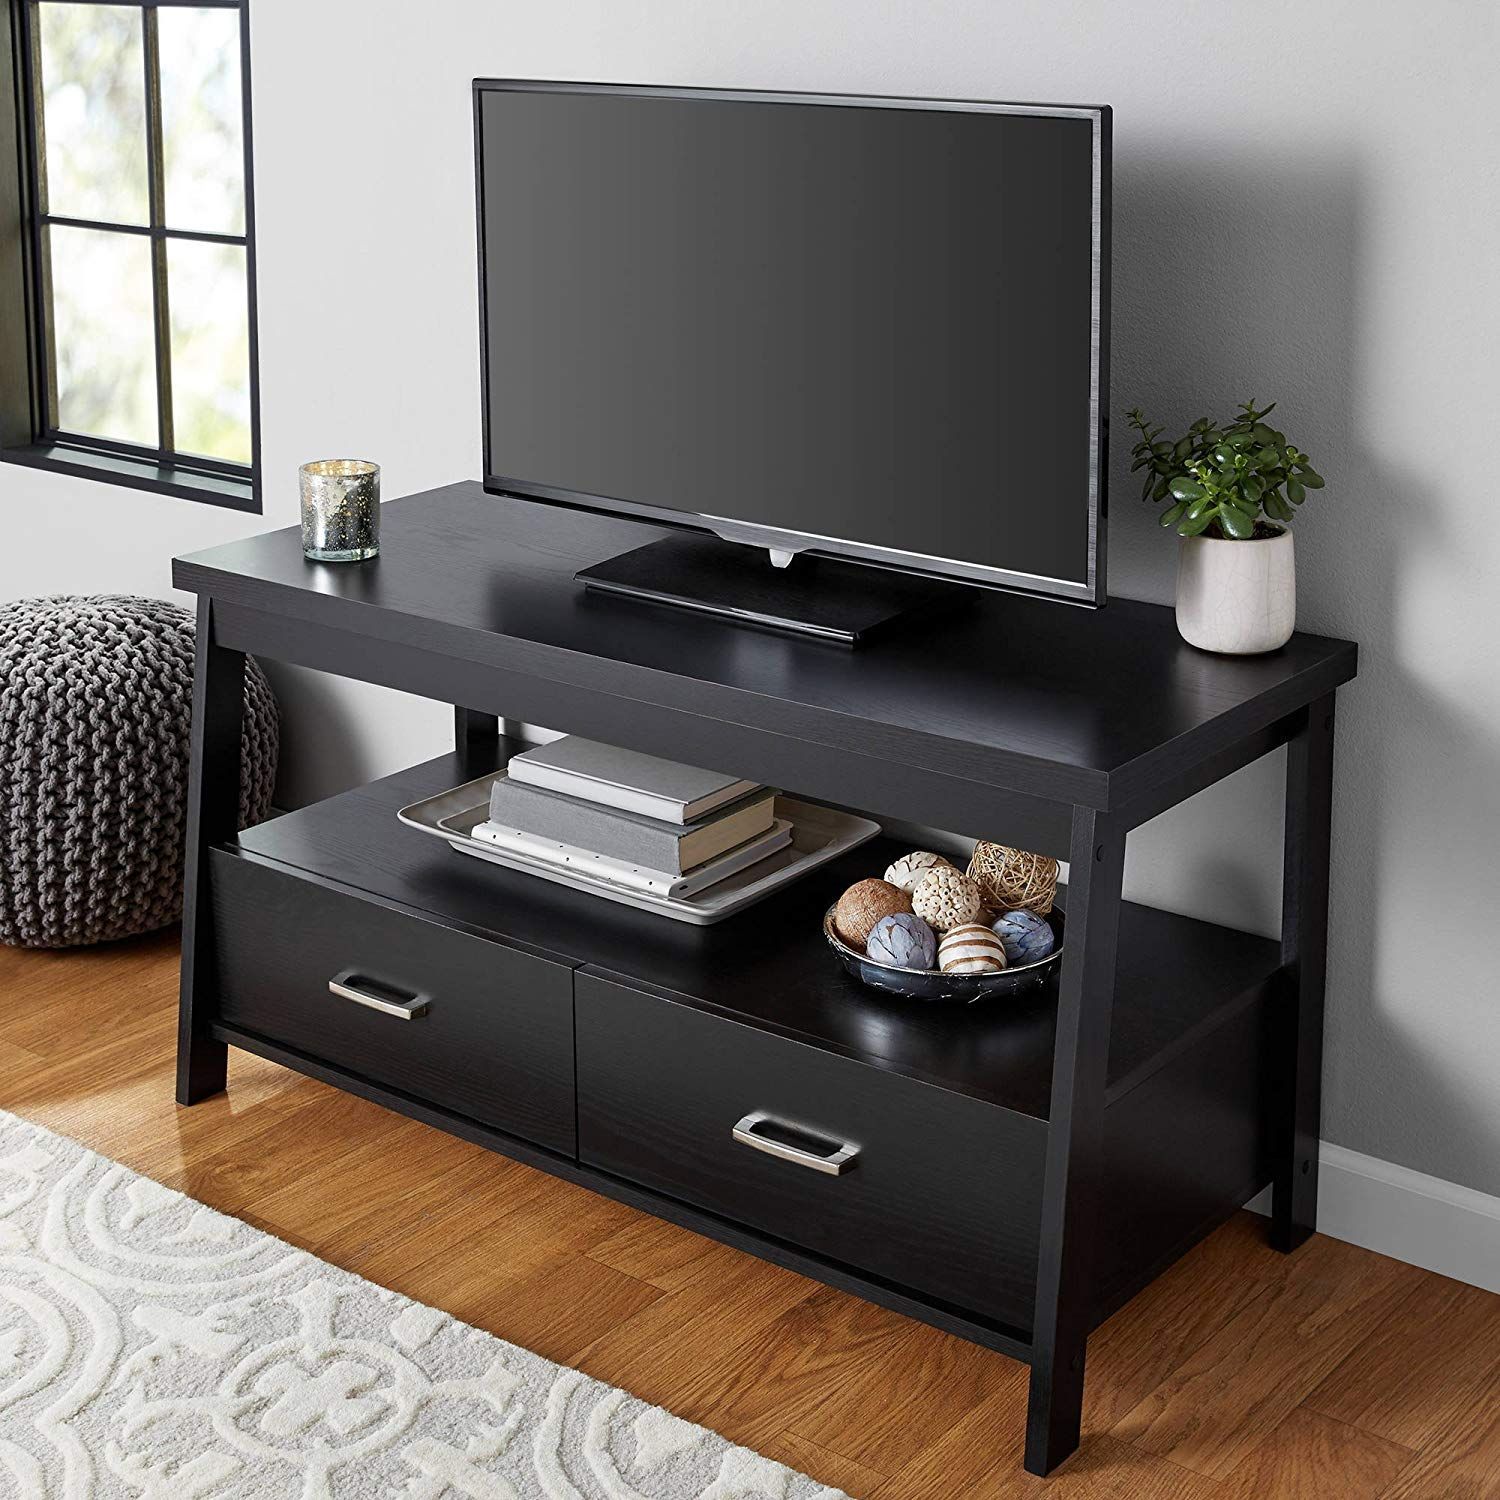 Mainstays Logan Tv Stand For Flat Screen Tvs Up To 47 And With Modern Plasma Tv Stands (View 1 of 15)